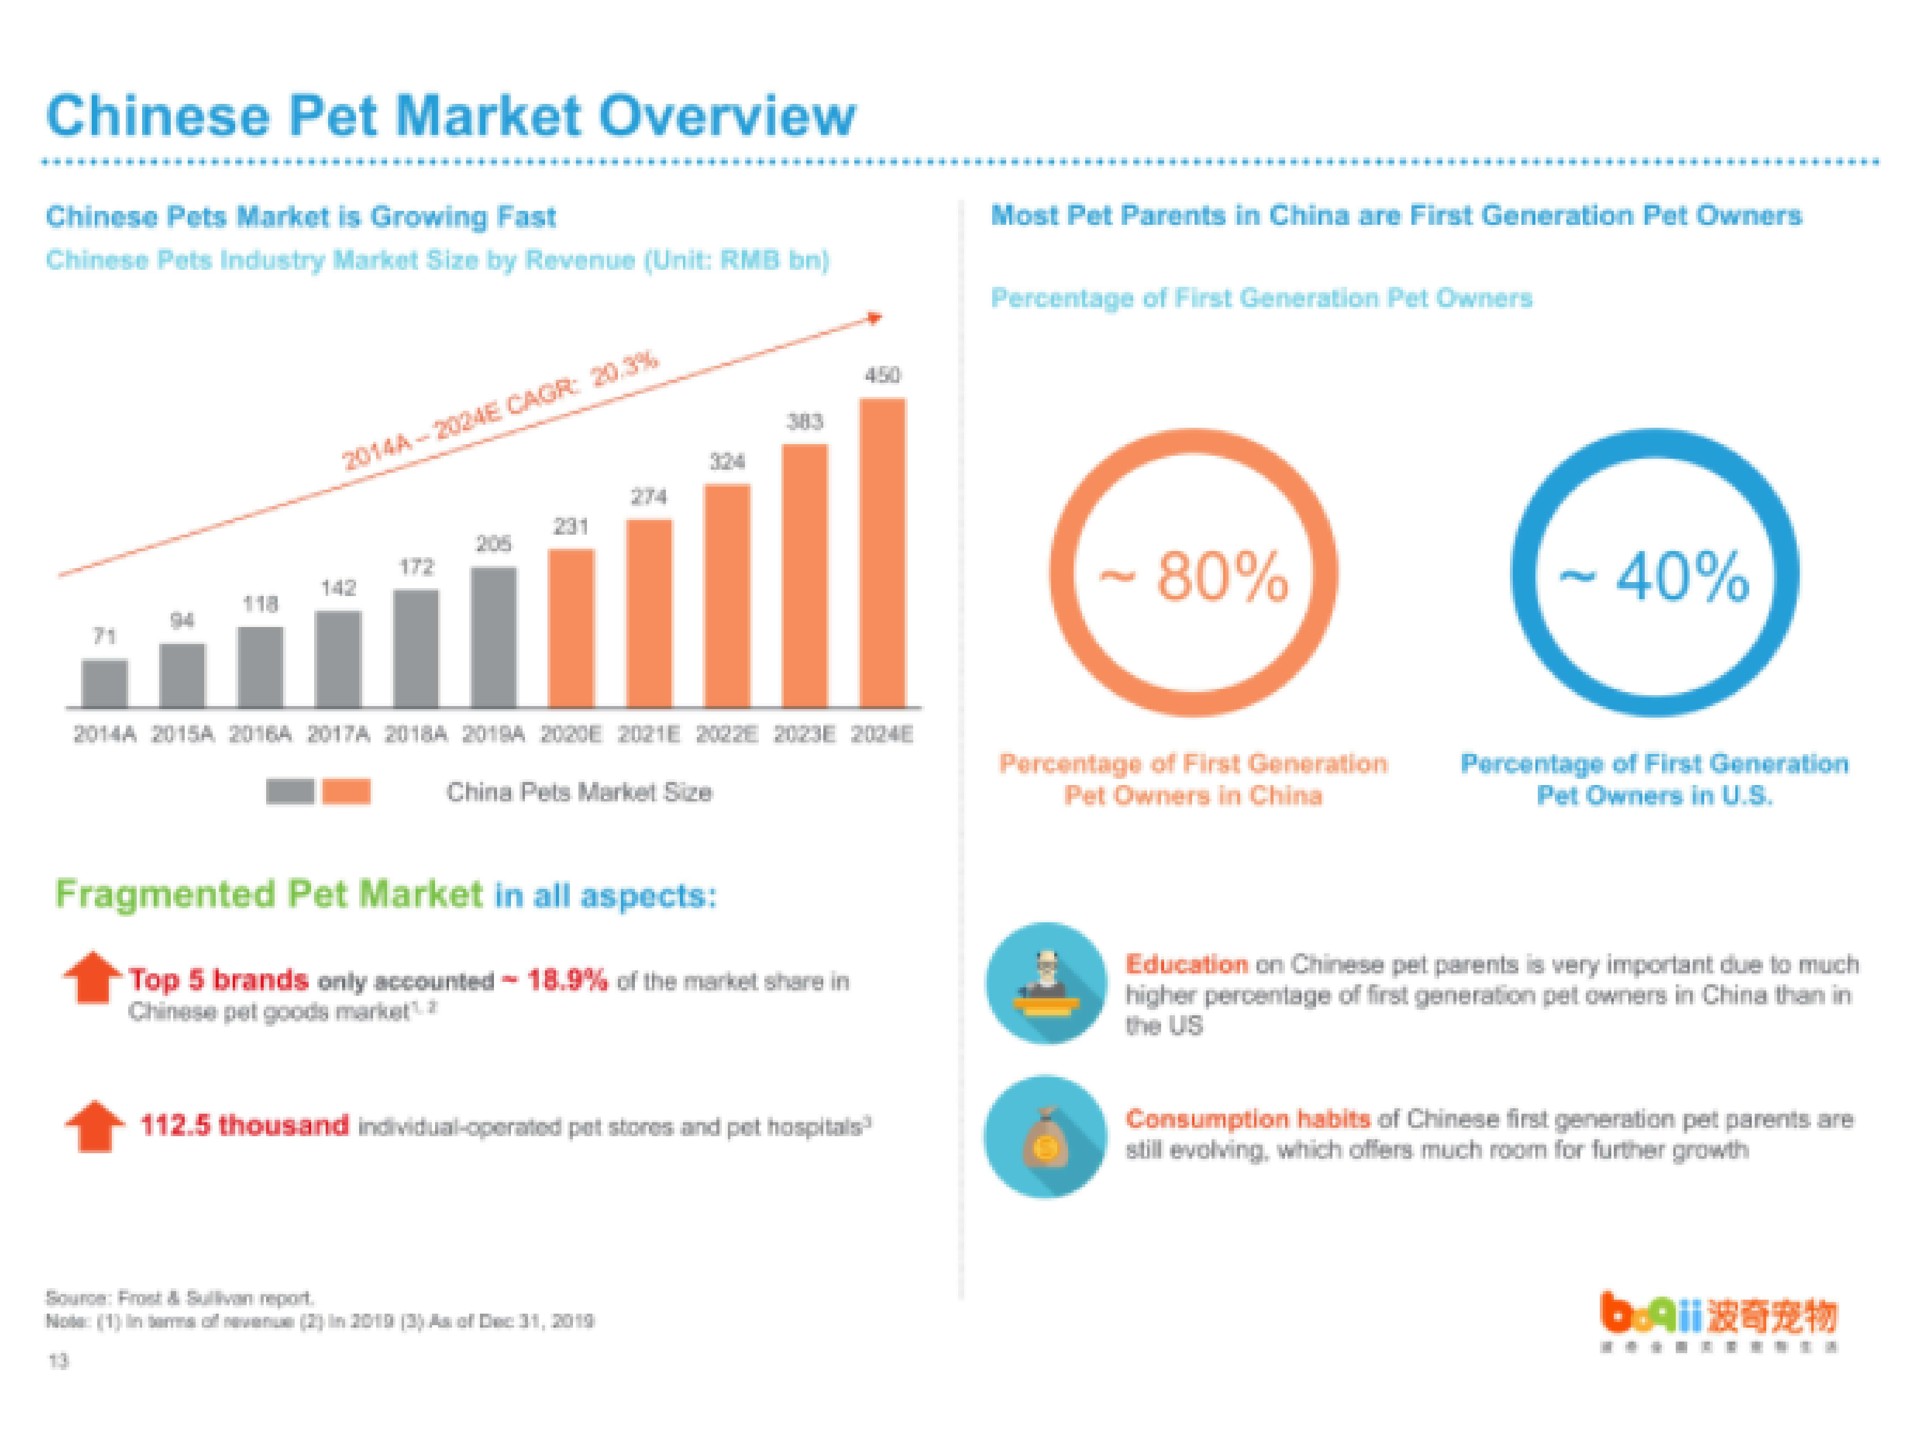 pet market overview pets market is growing fast most pet parents in china are first generation pet owners percentage of first generation pet owners a a china pets market size percentage of first generation pet owners in china percentage of first generation pet owners in fragmented pet market in all aspects top brands only accounted of the market share in goods market education on parents very important due to much higher of first generation owners in china in the us thousand operated pot stores and pet consumption habits of generation pet parents are evolving which offers much row for further growth | Boqii Holding